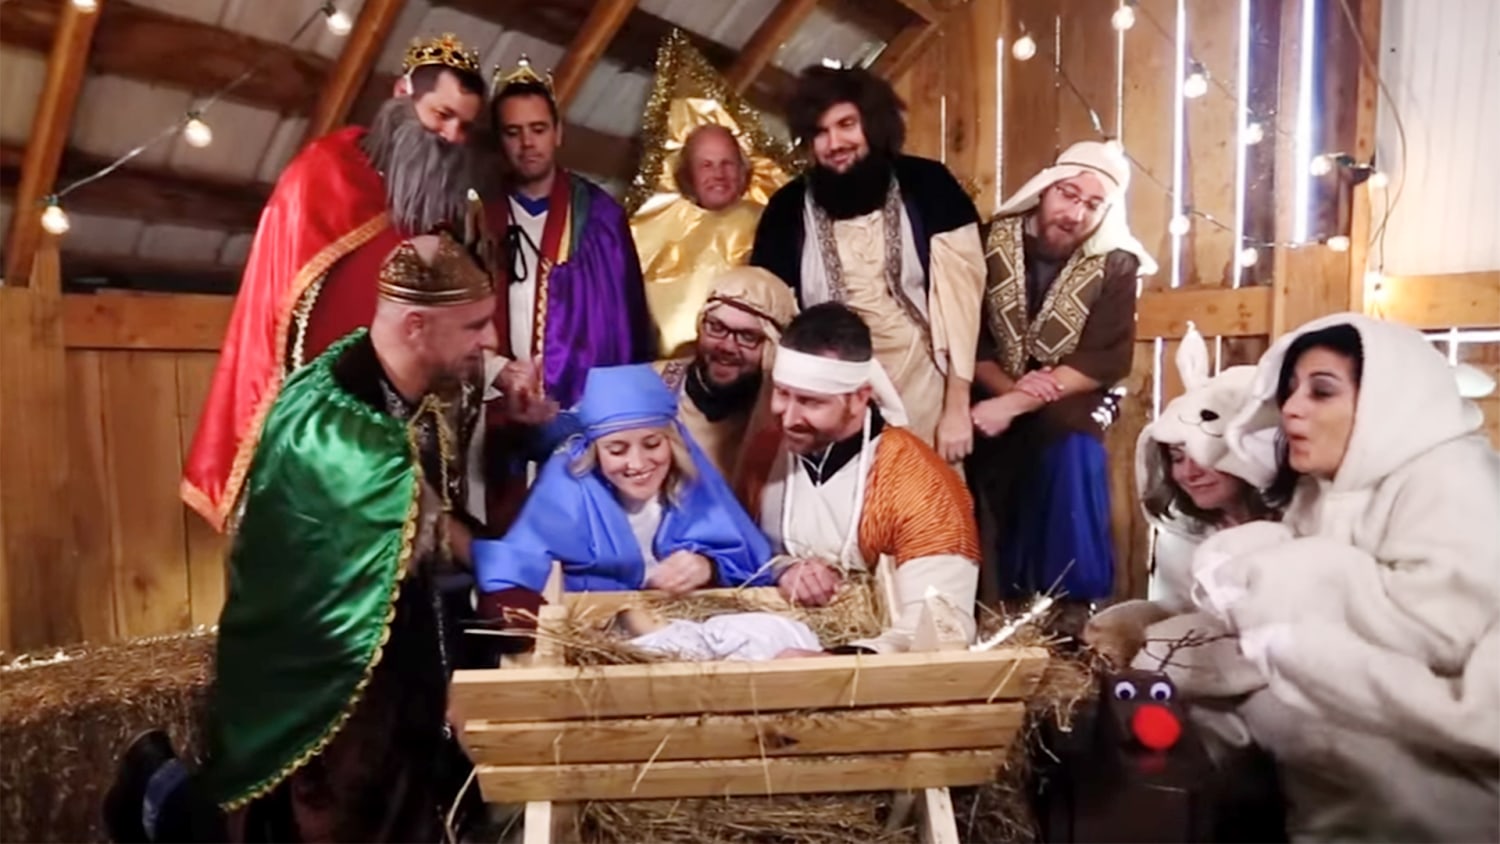 Kids tell Christmas story in funny viral video